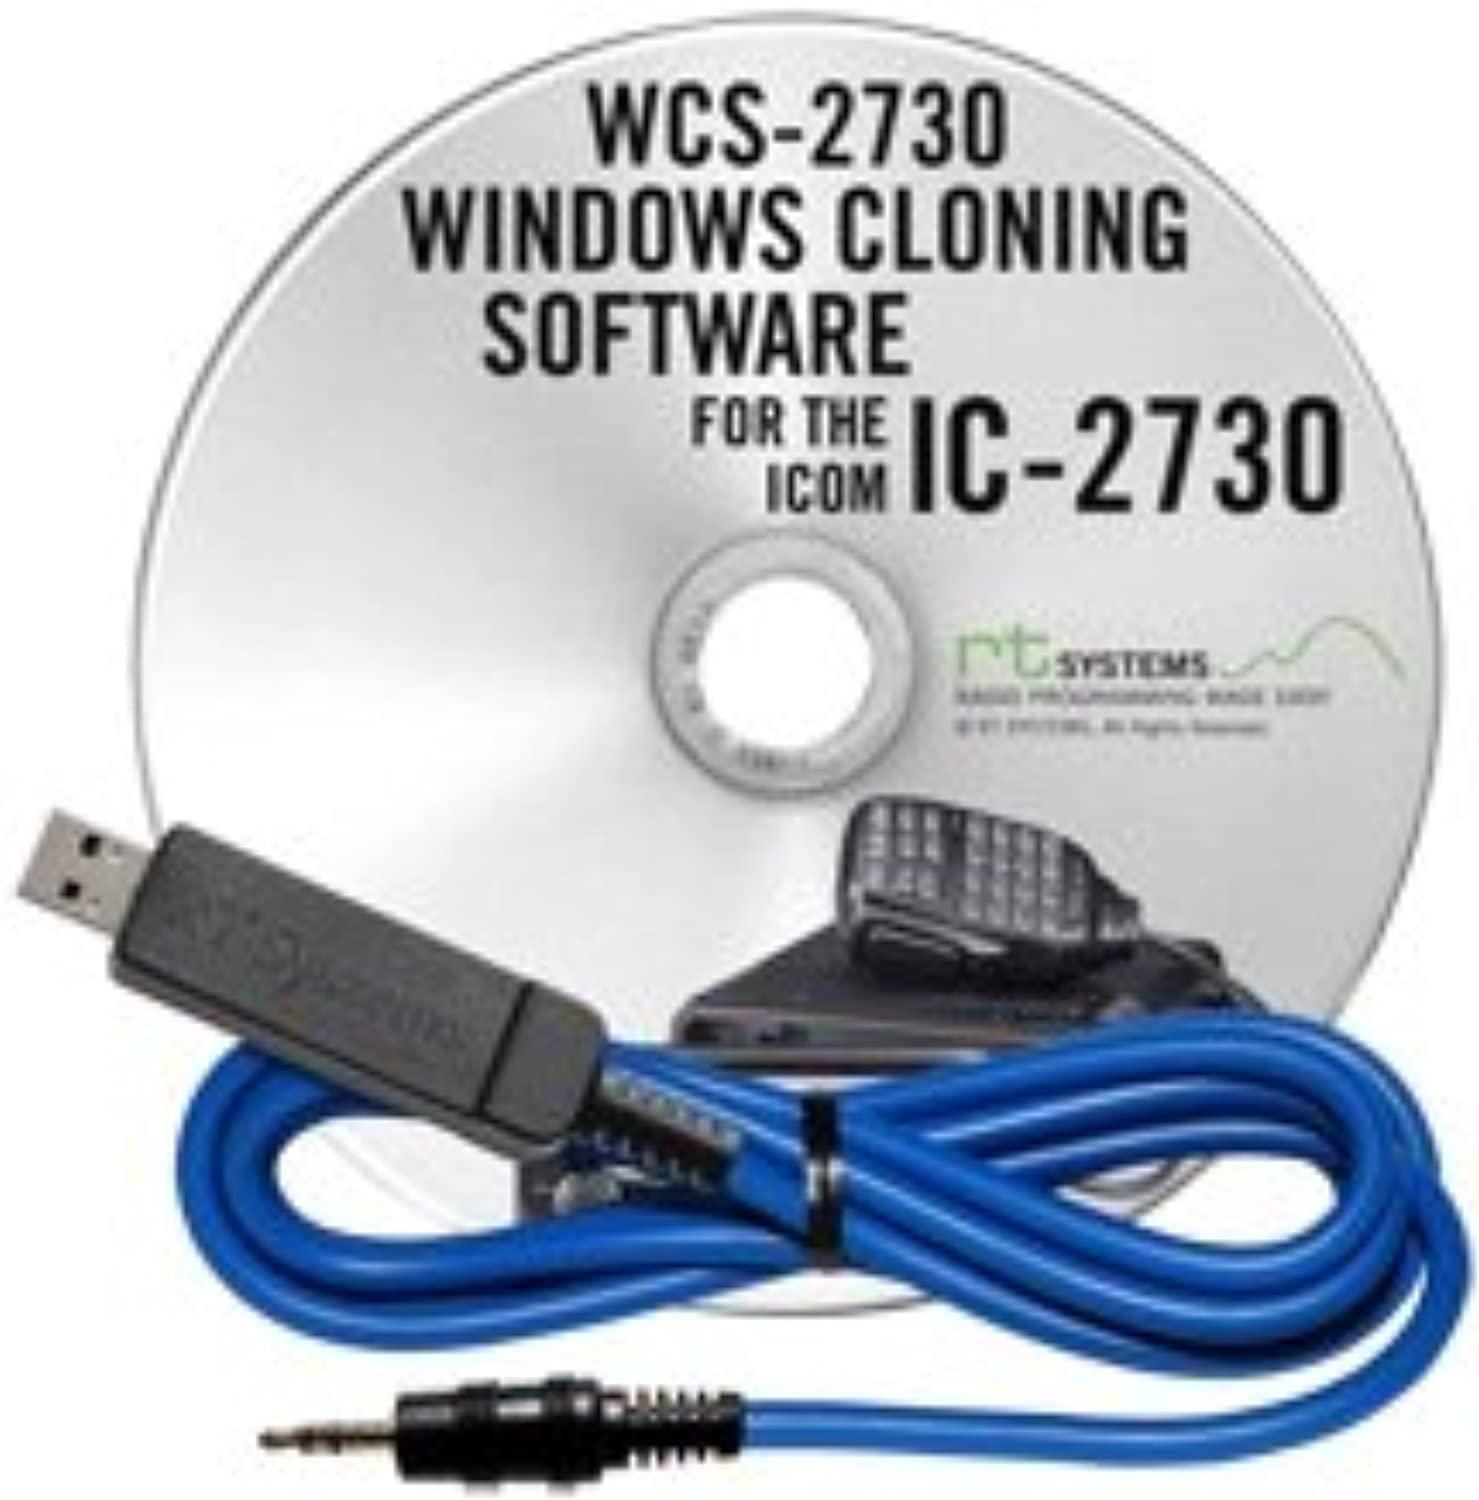 Icom rt systems original wcs-2730 usb software (version 5.0) and usb programming cable (usb-29a) for the ic-2730